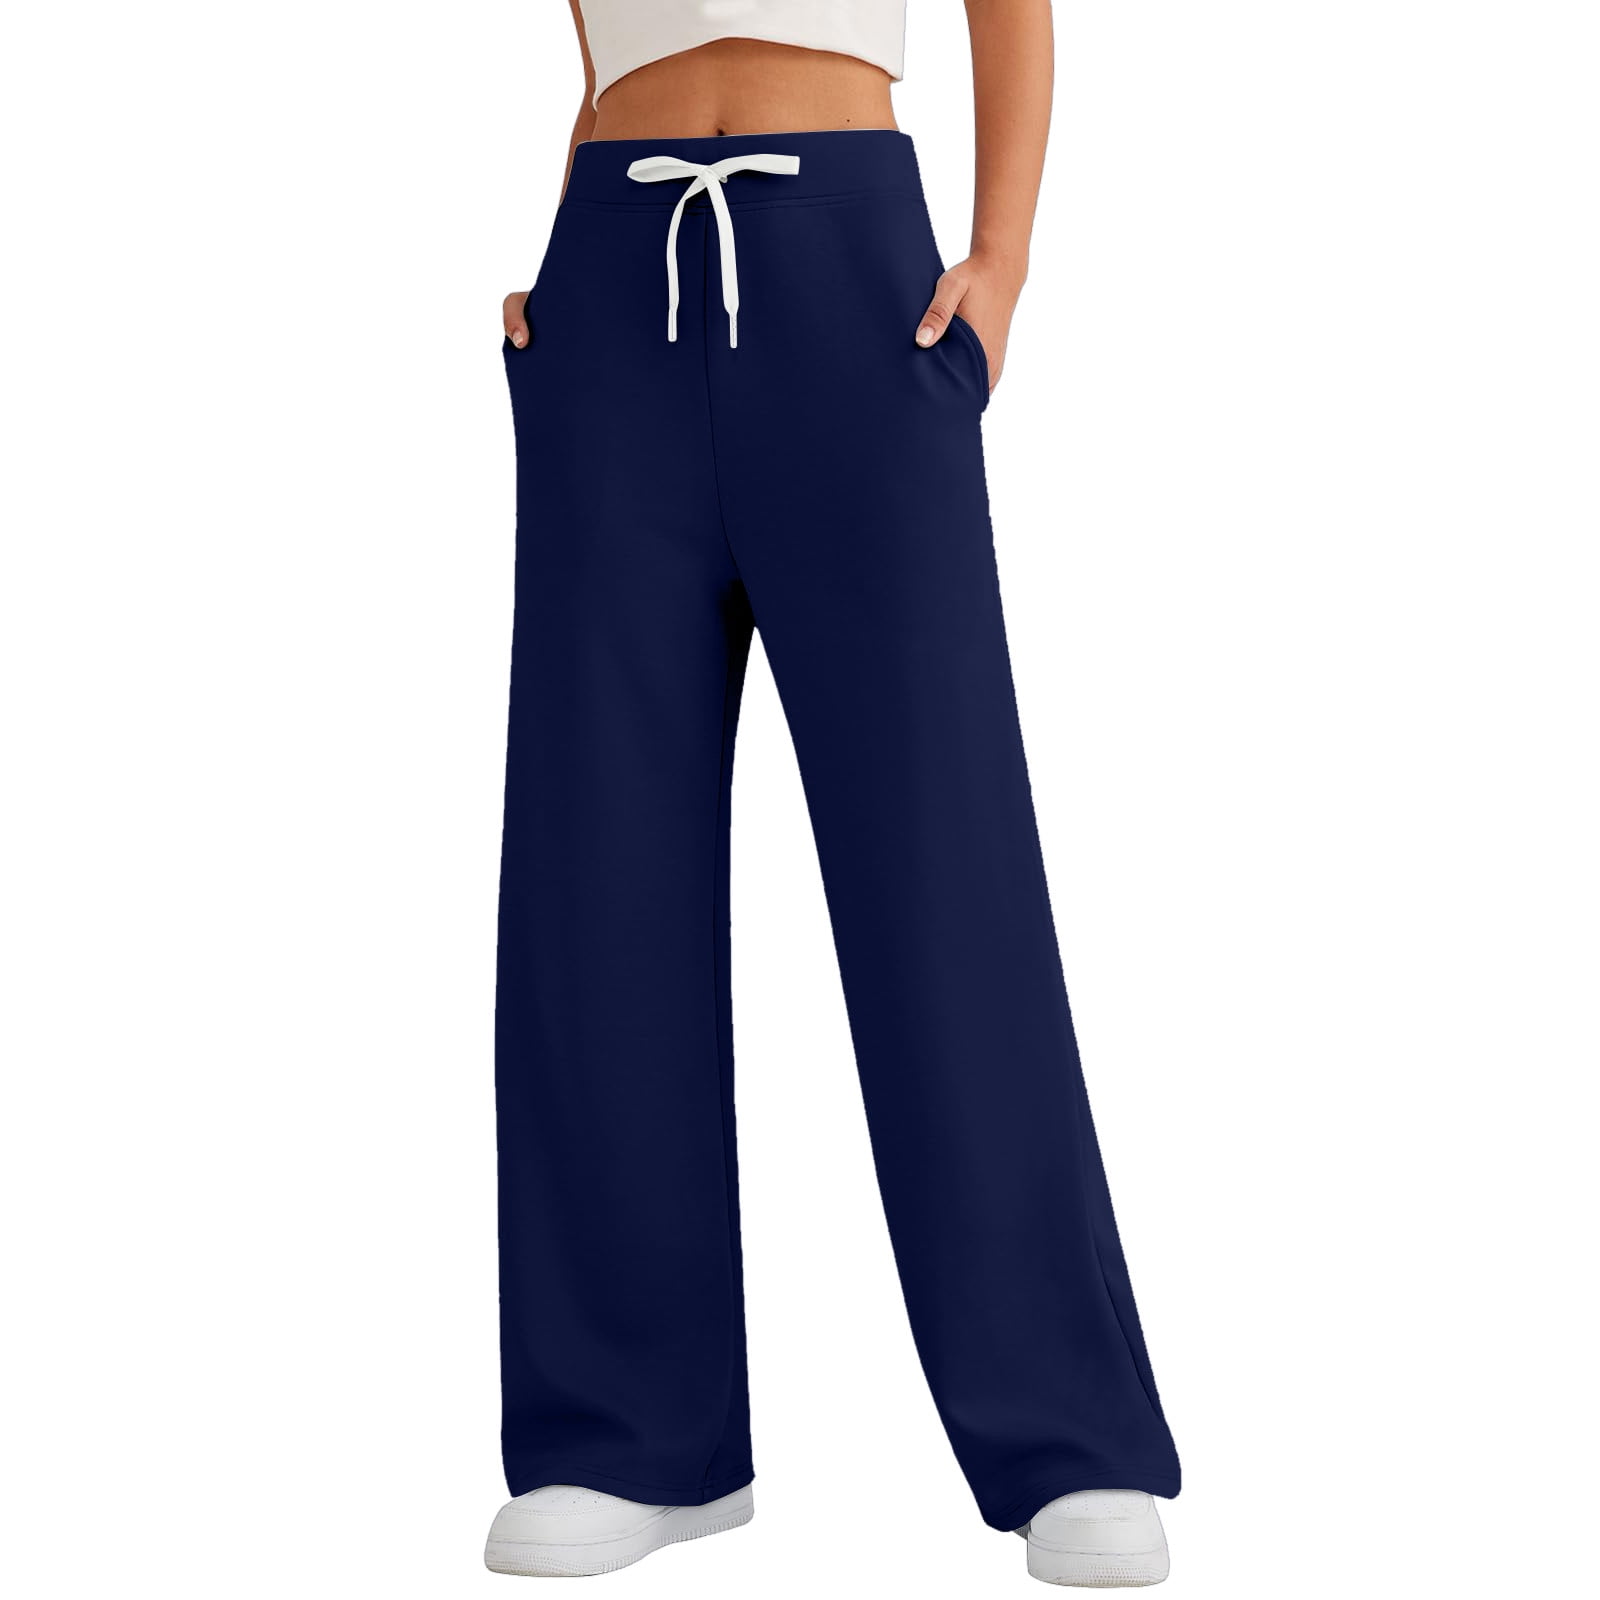 TQWQT Women's Wide Leg Sweatpants Casual Trendy Trending Loose Fit Comfy  High Wasited Elastic Waist Jogger Winter Sweat Pants with Pockets Light  Navy